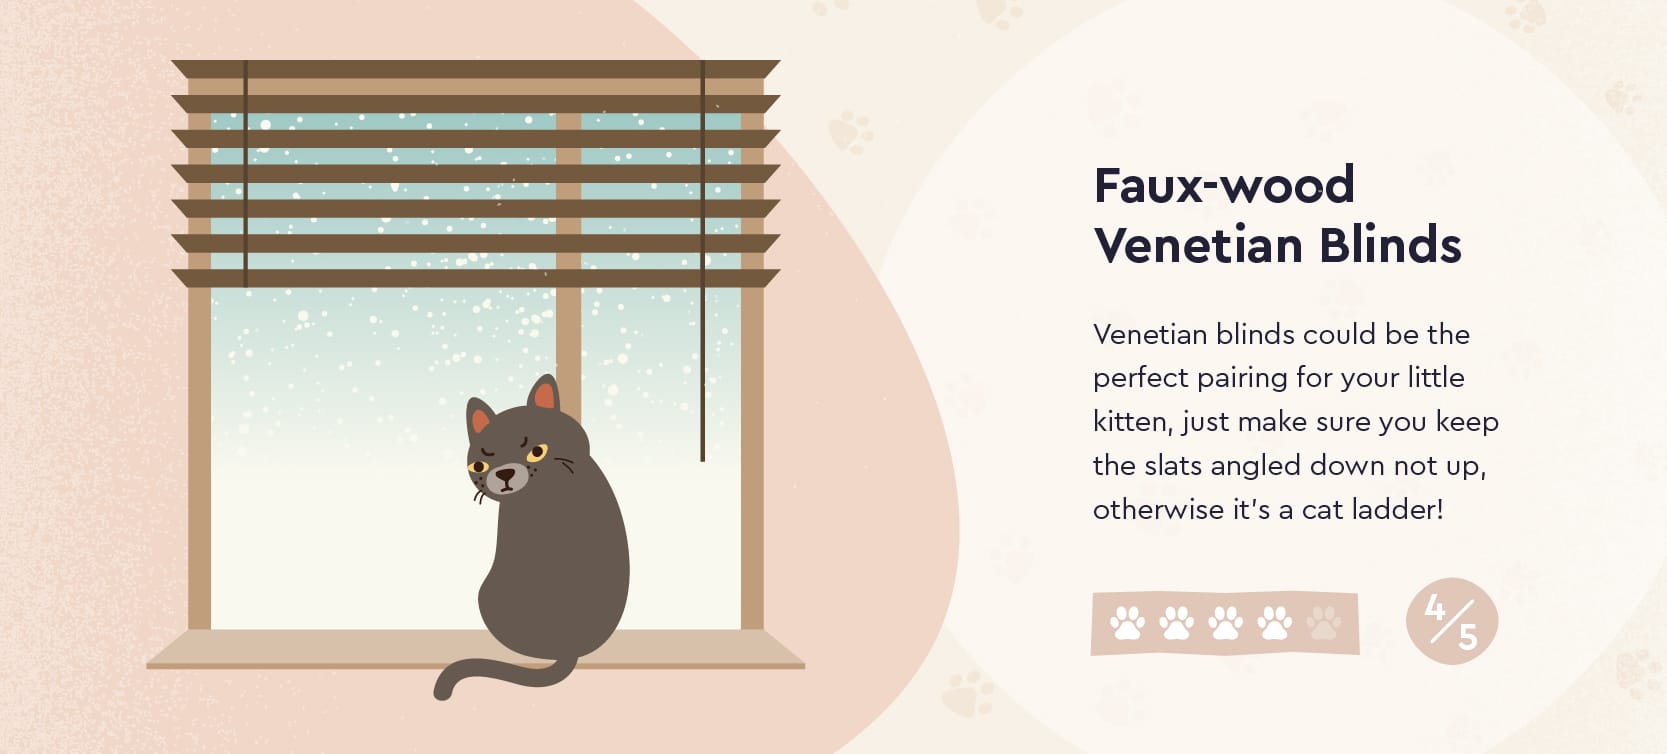 Faux Wood Venetian Blinds and Cats